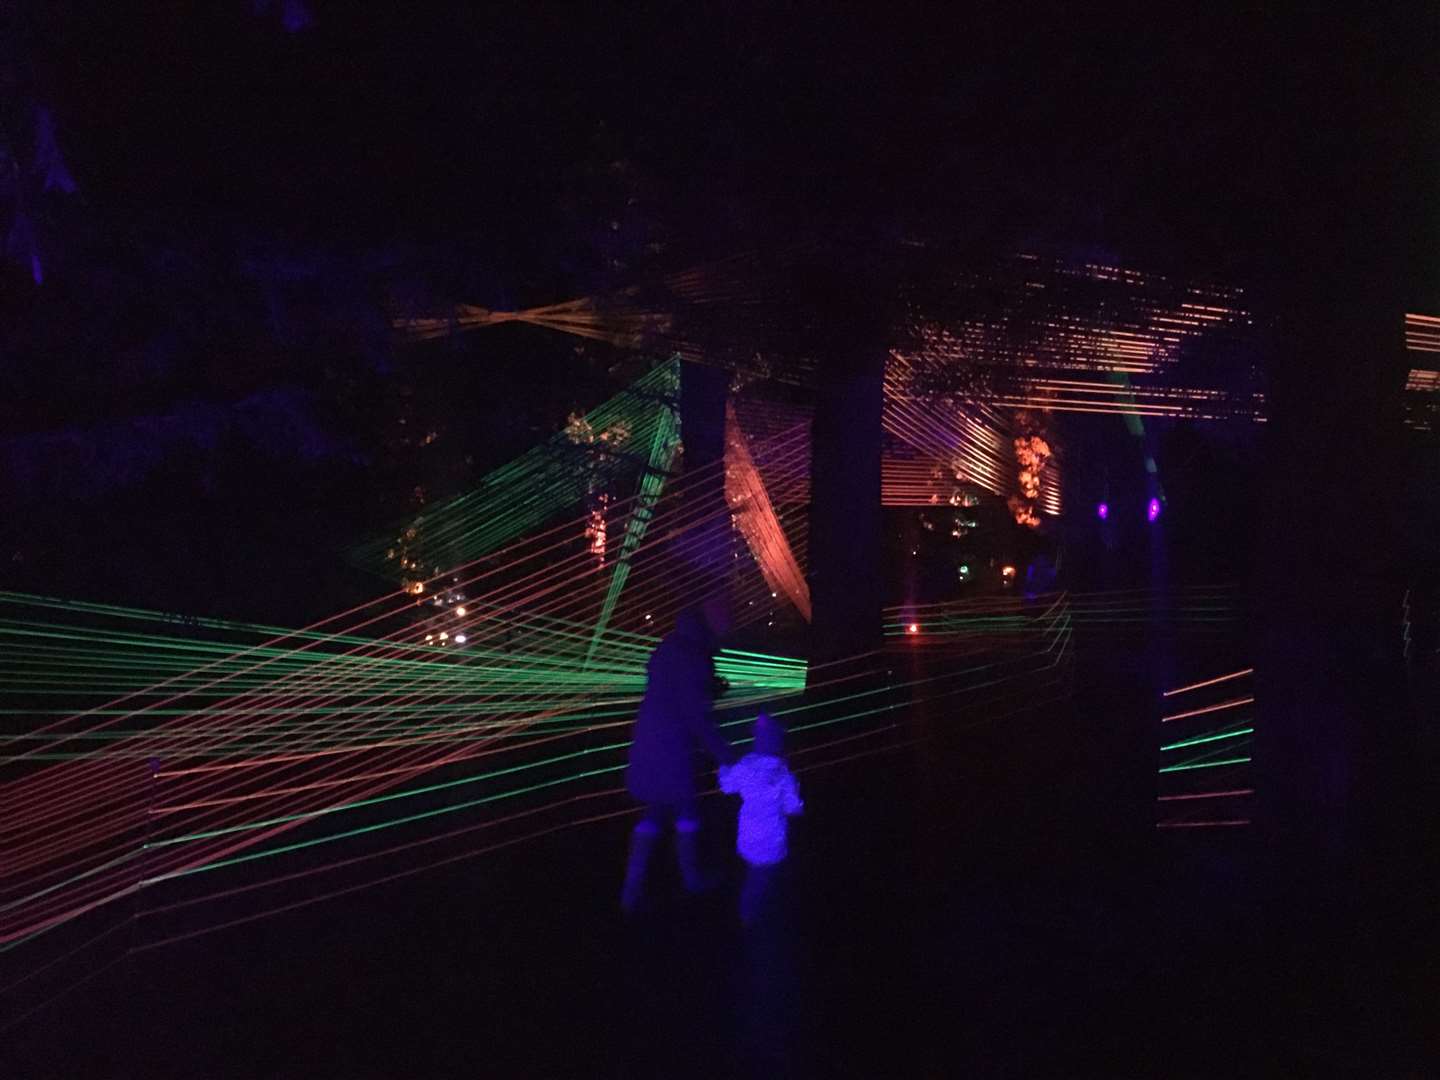 Neon rope lights dazzle at the start of the trail